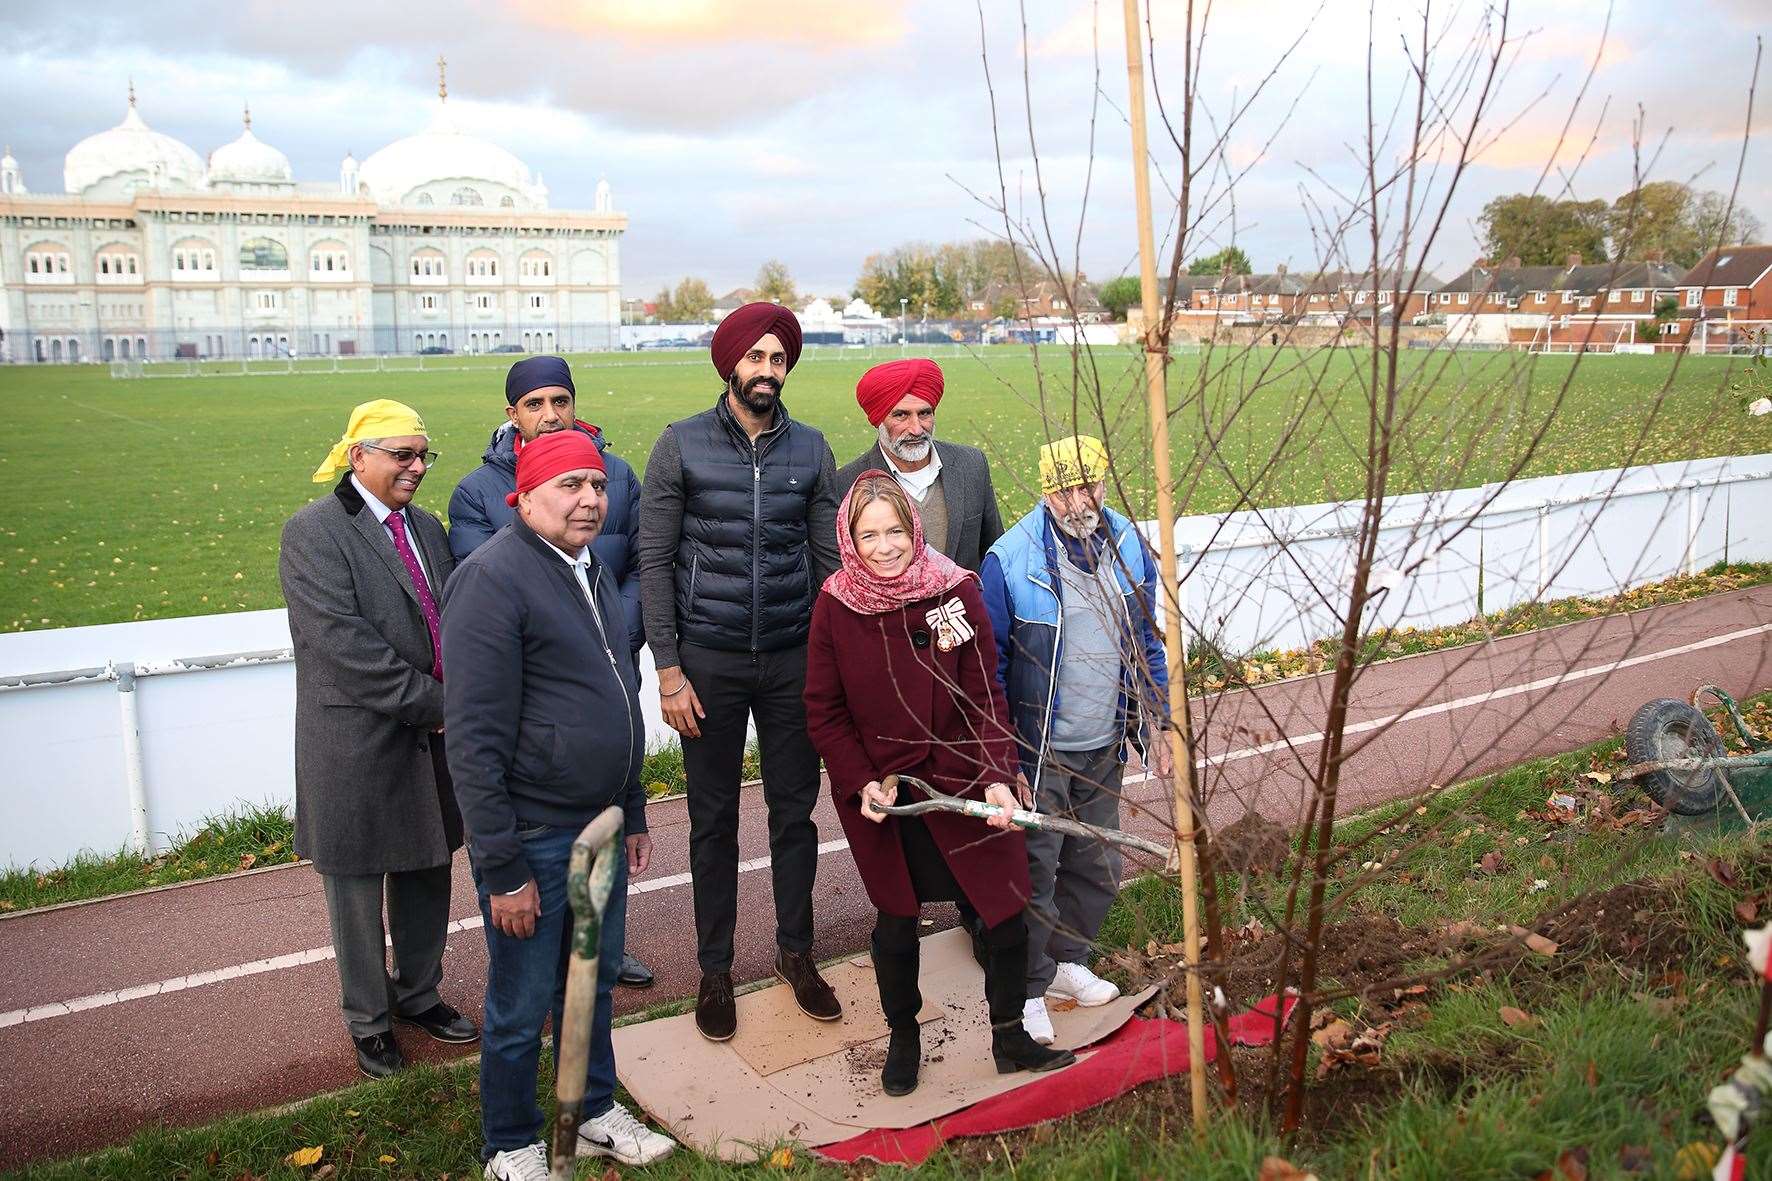 The Lord Lieutenant of Kent planted a tree in memory of Queen Elizabeth